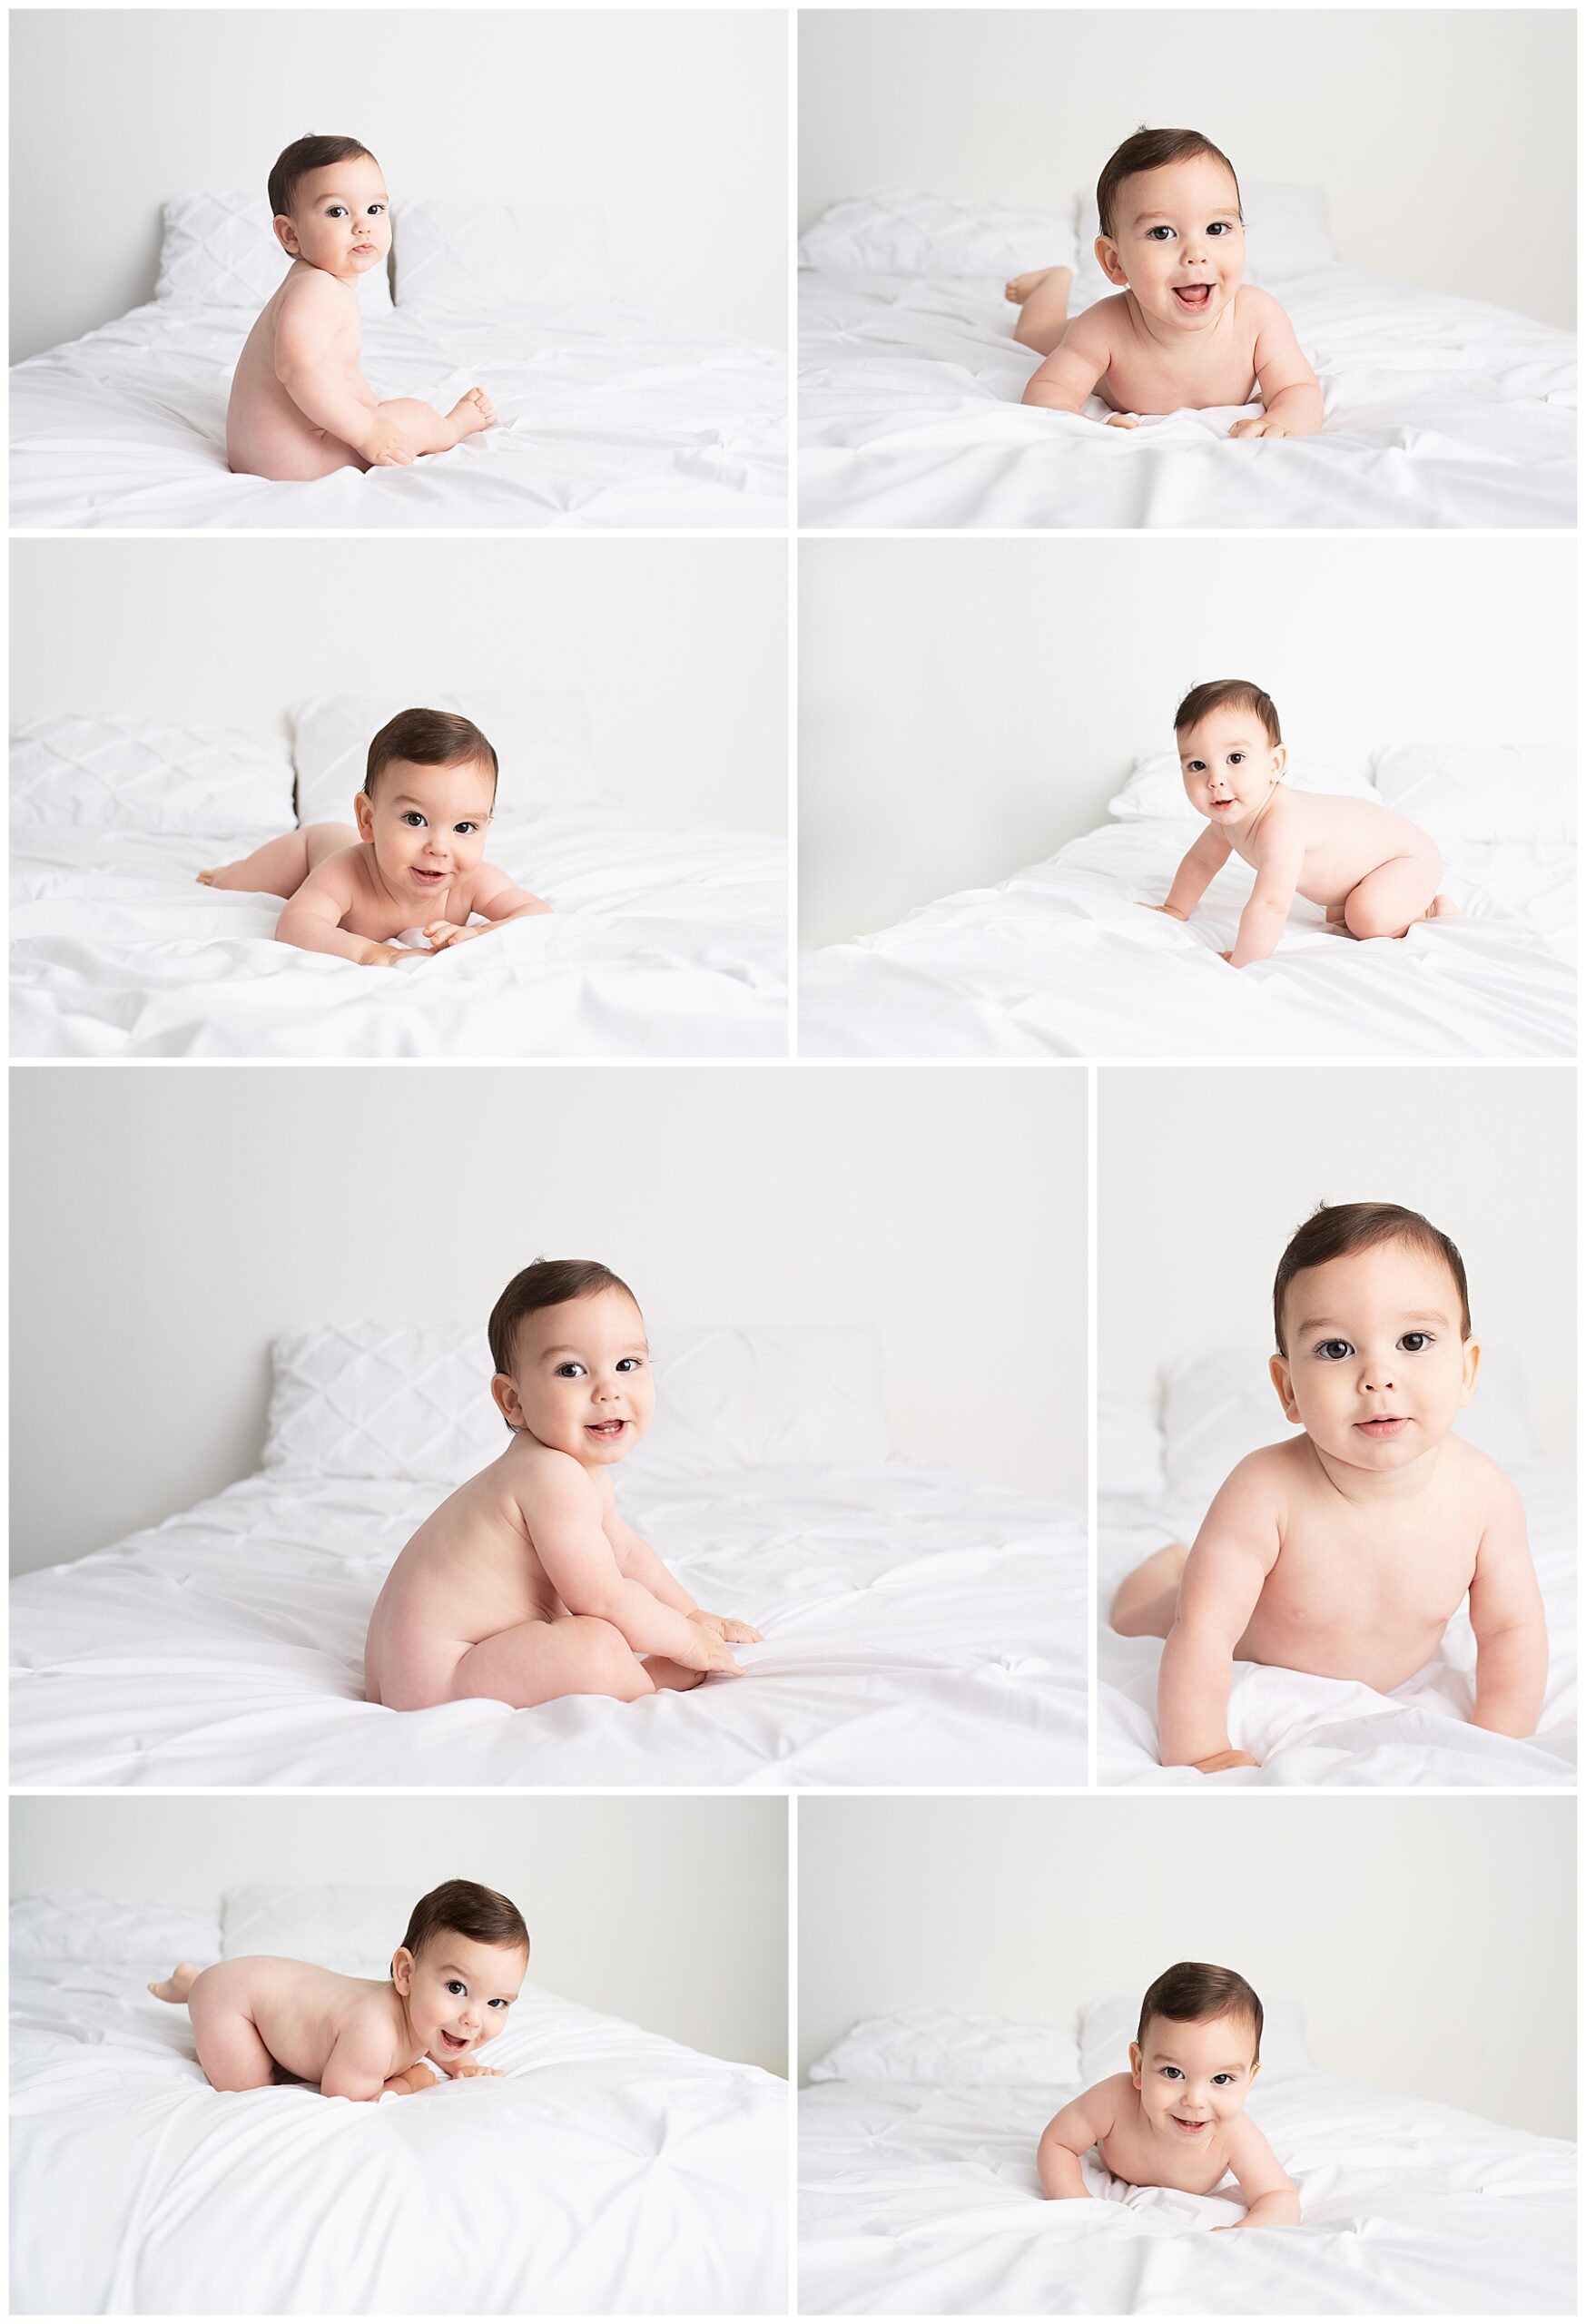 happy baby boy crawling around on the studio bed for his photo session